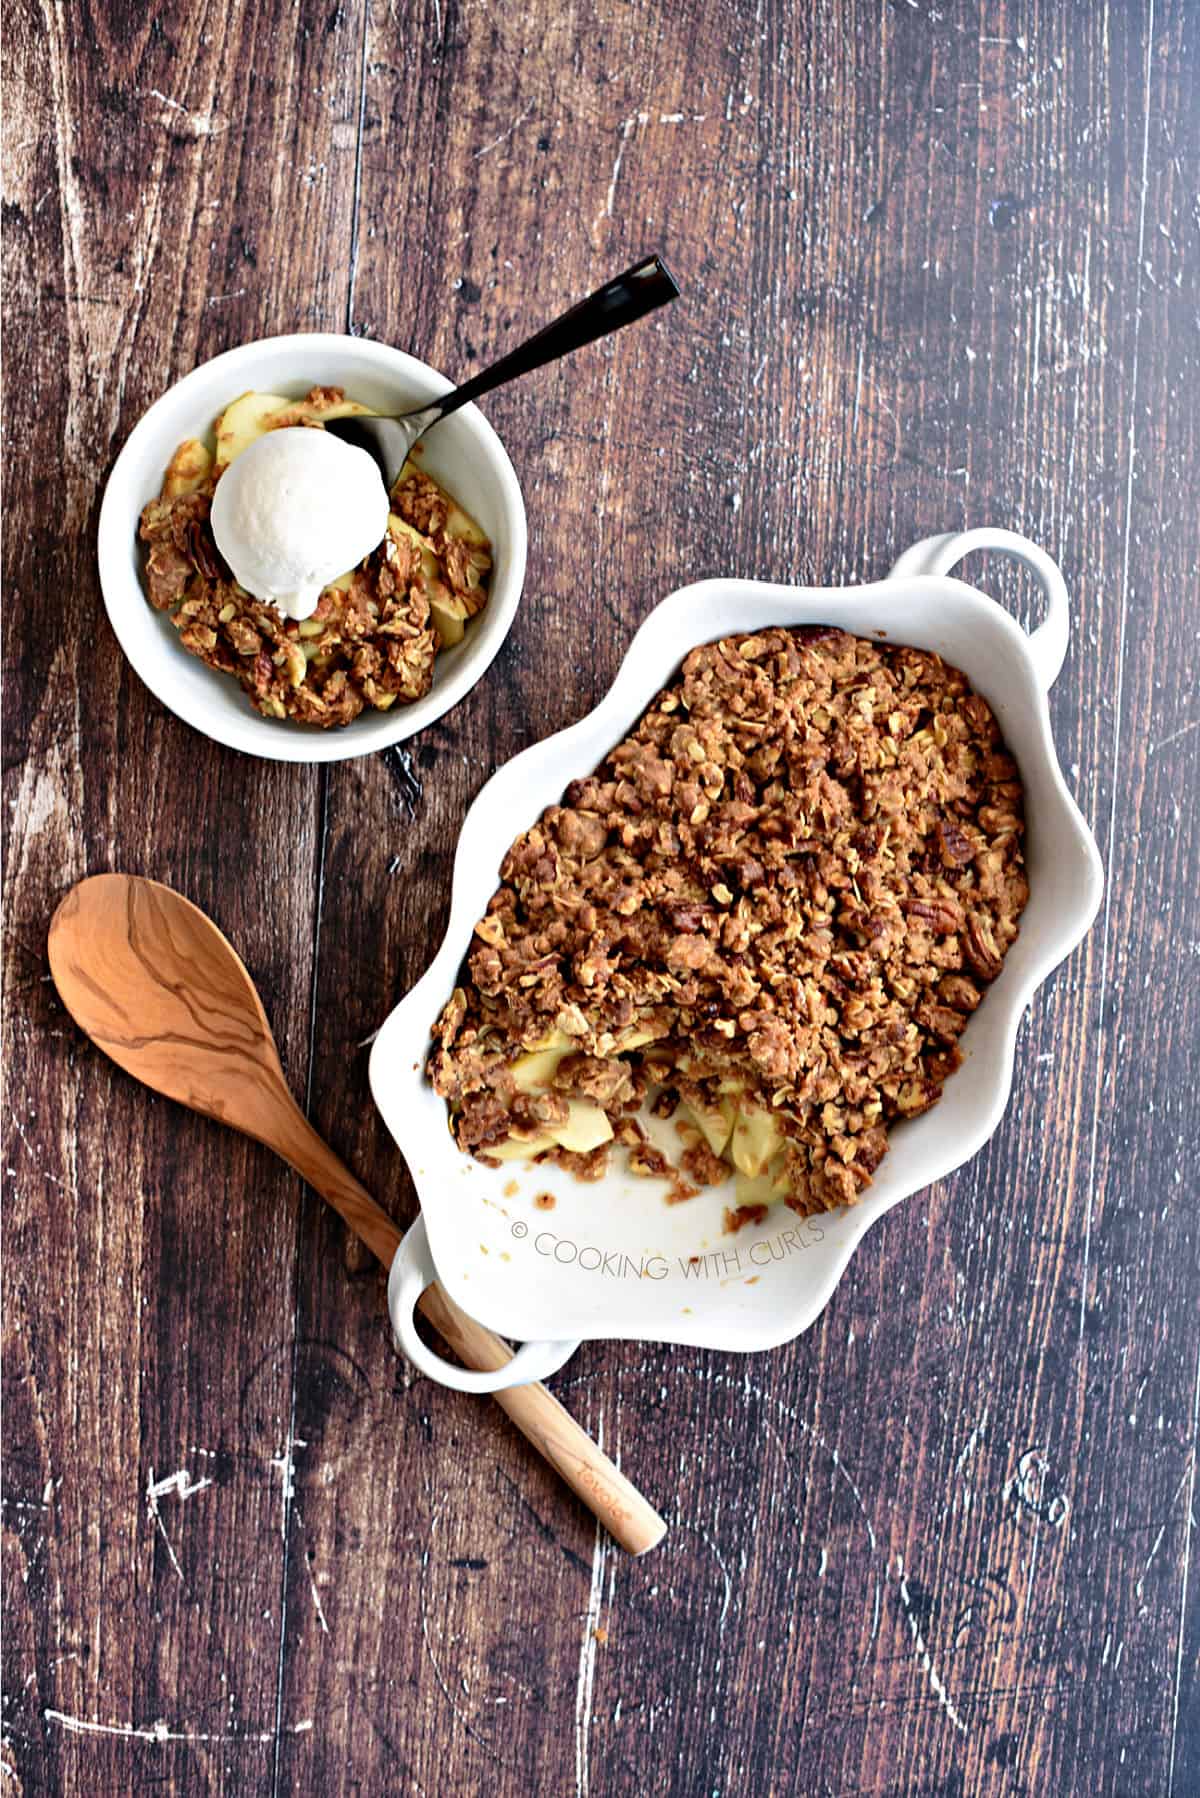 looking down on a baked apple crisp in the baking dish, a wooden spoon laying next to it and a white bowl with a scoop of ice cream on top of the apple crisp.